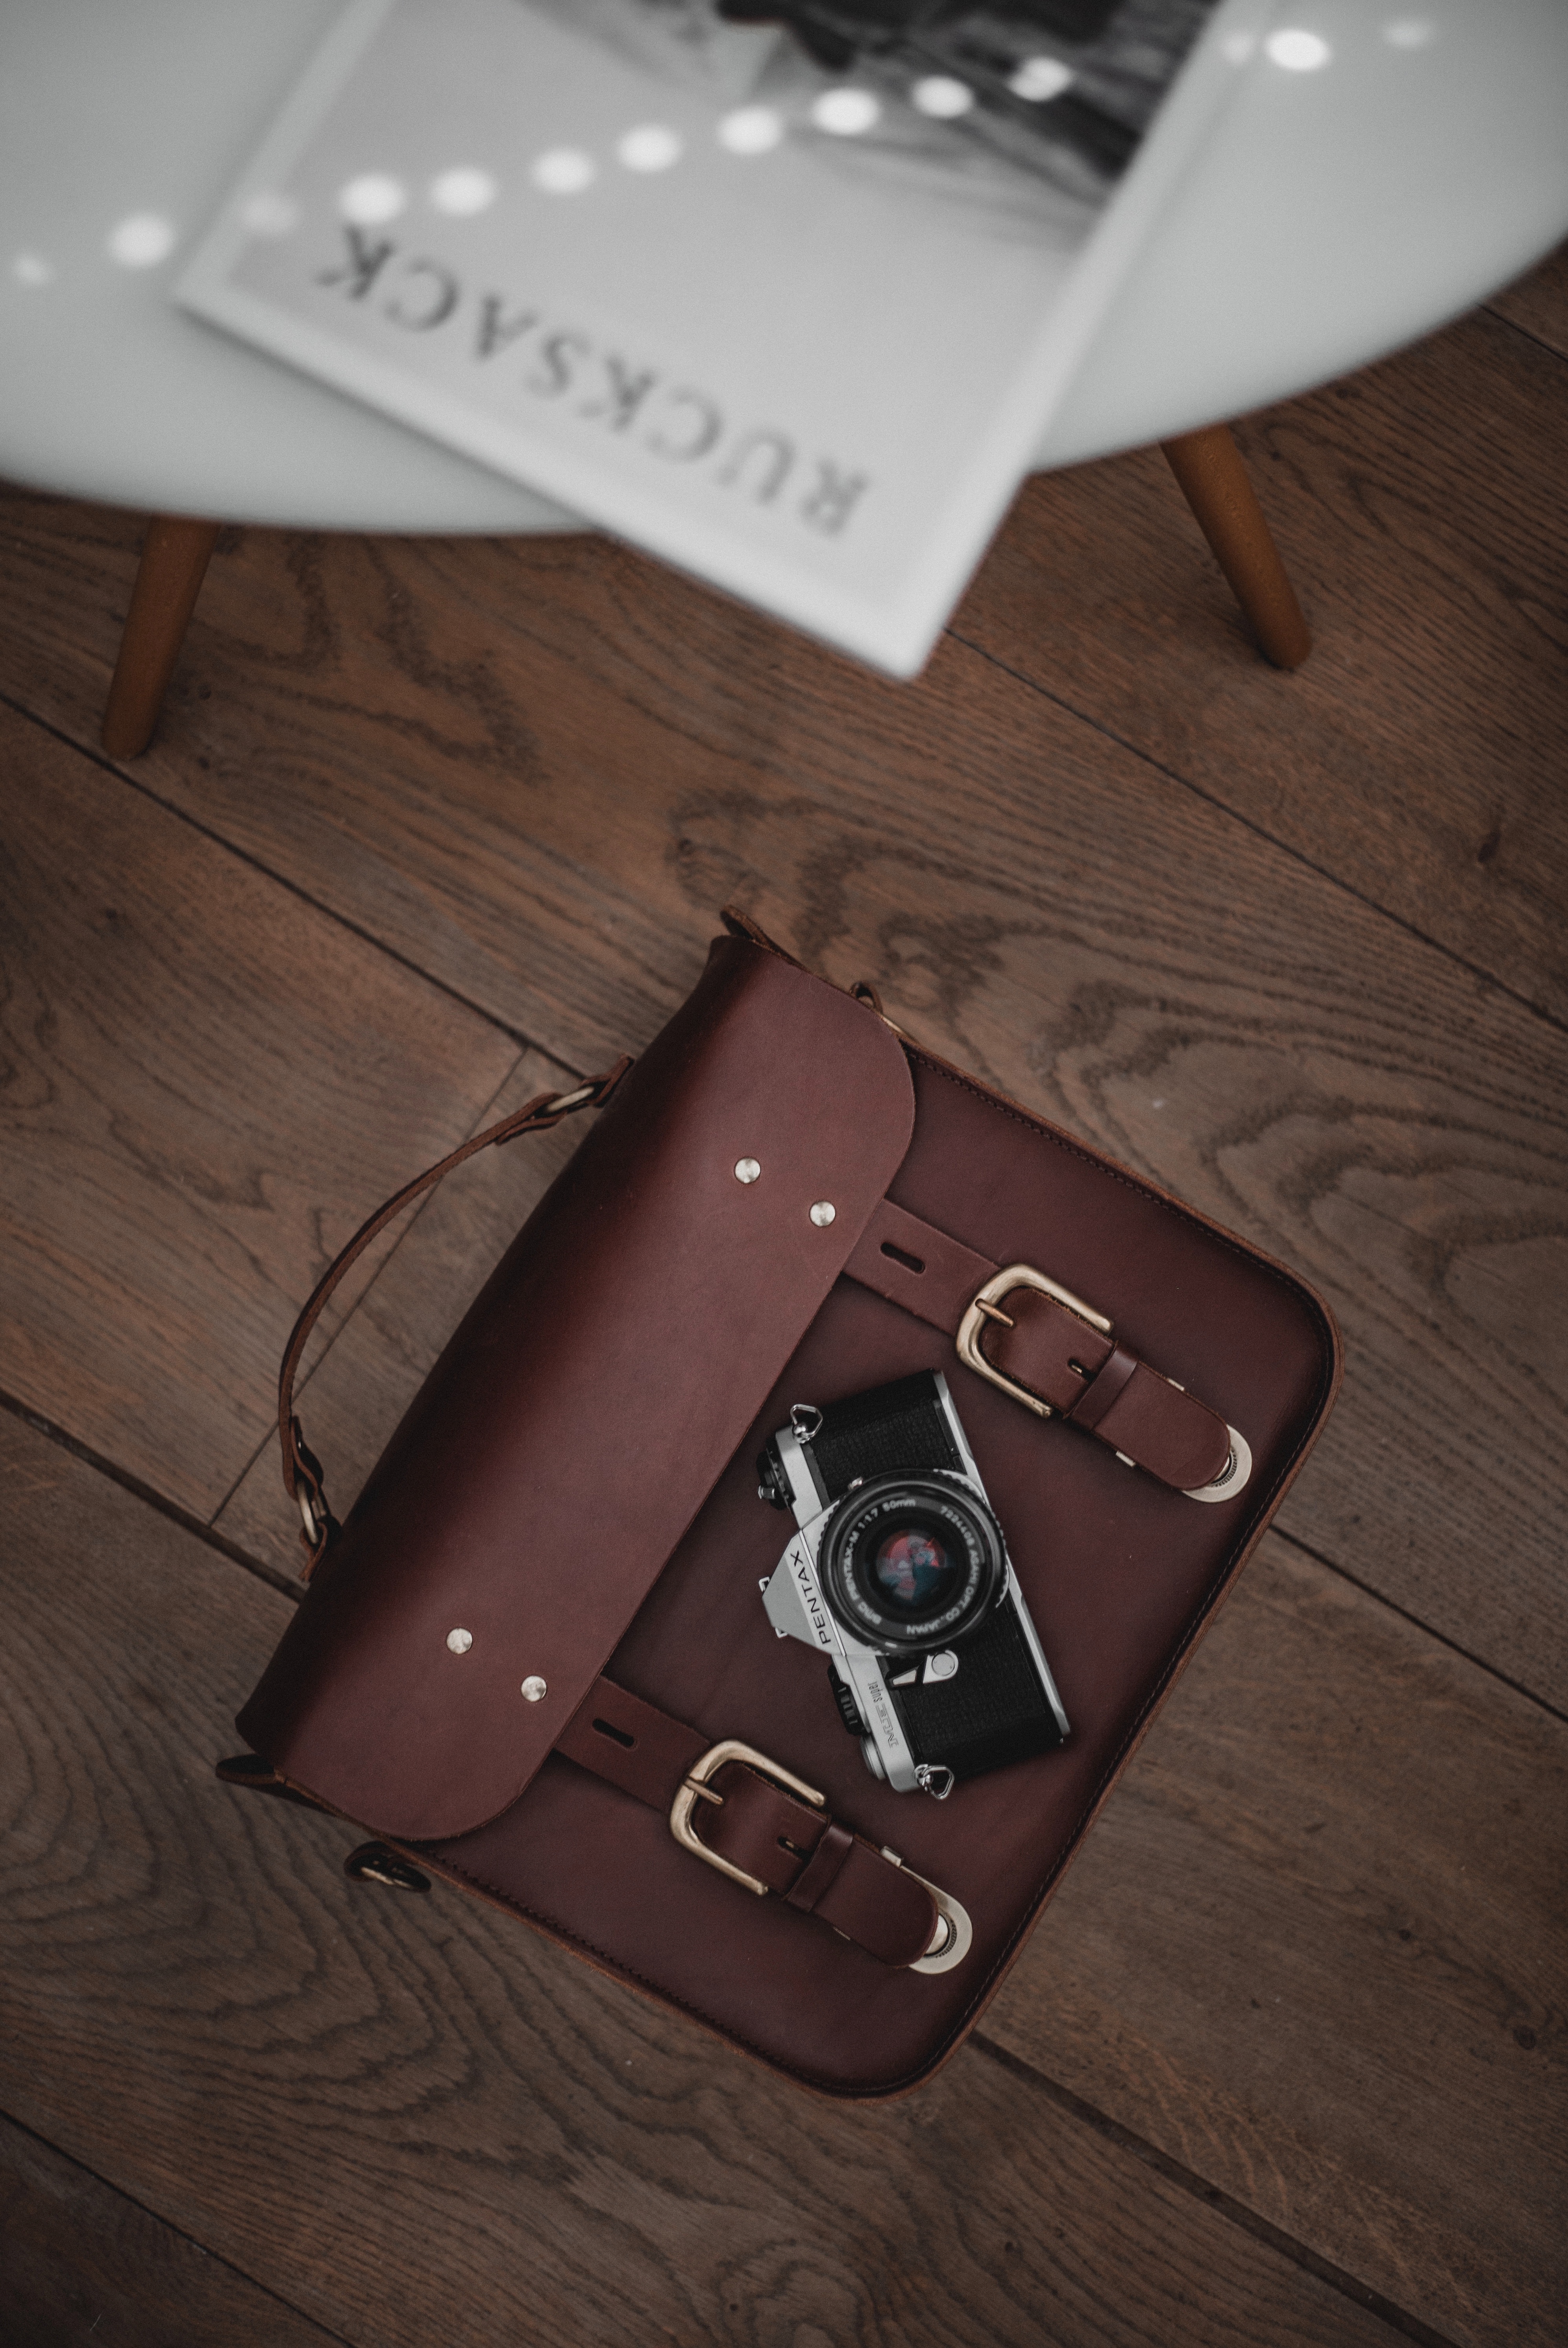 leather, technologies, technology, old, lens, bag, camera, floor, accessory